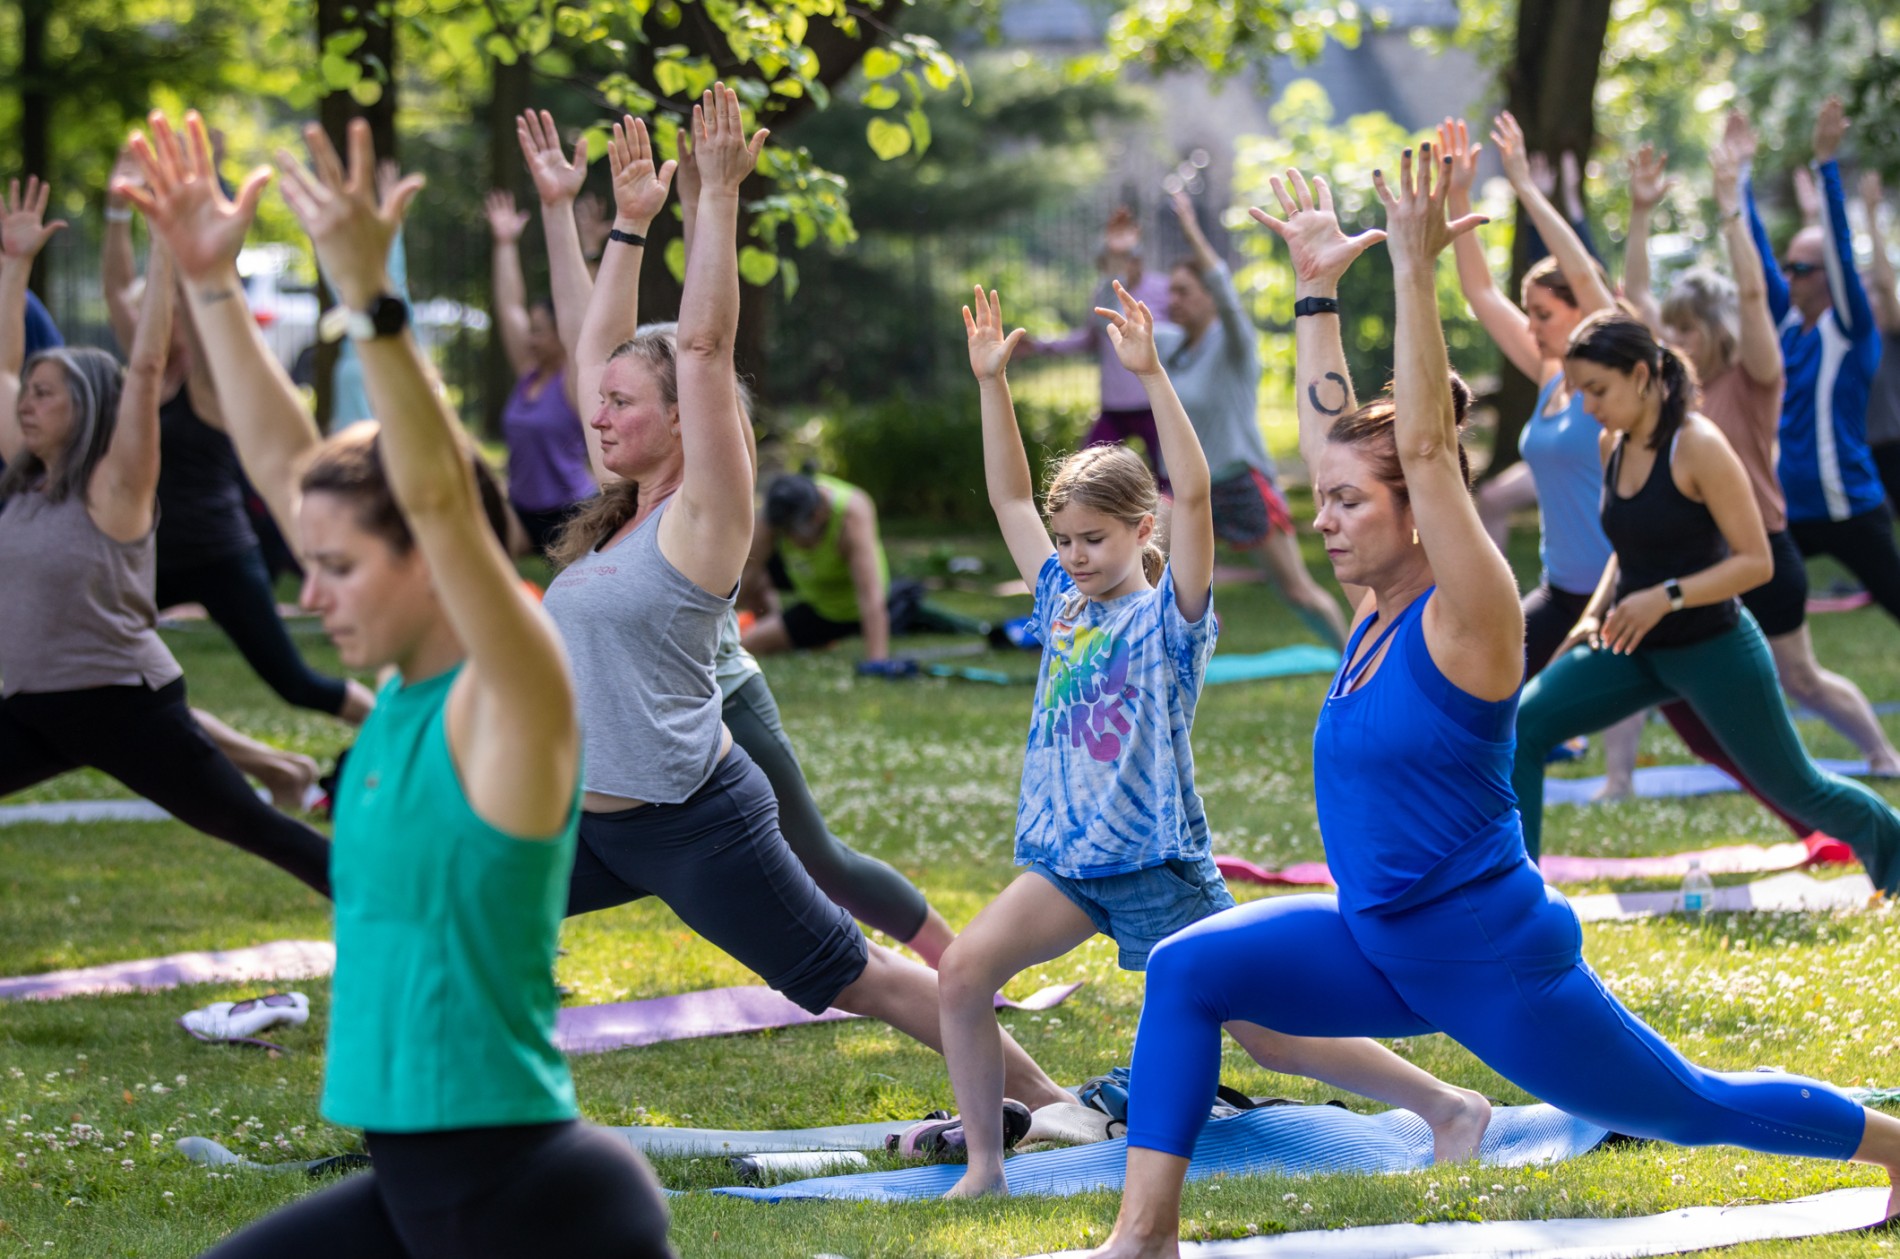 15 yoga practitioners in the Warrior pose outside in a treelined park